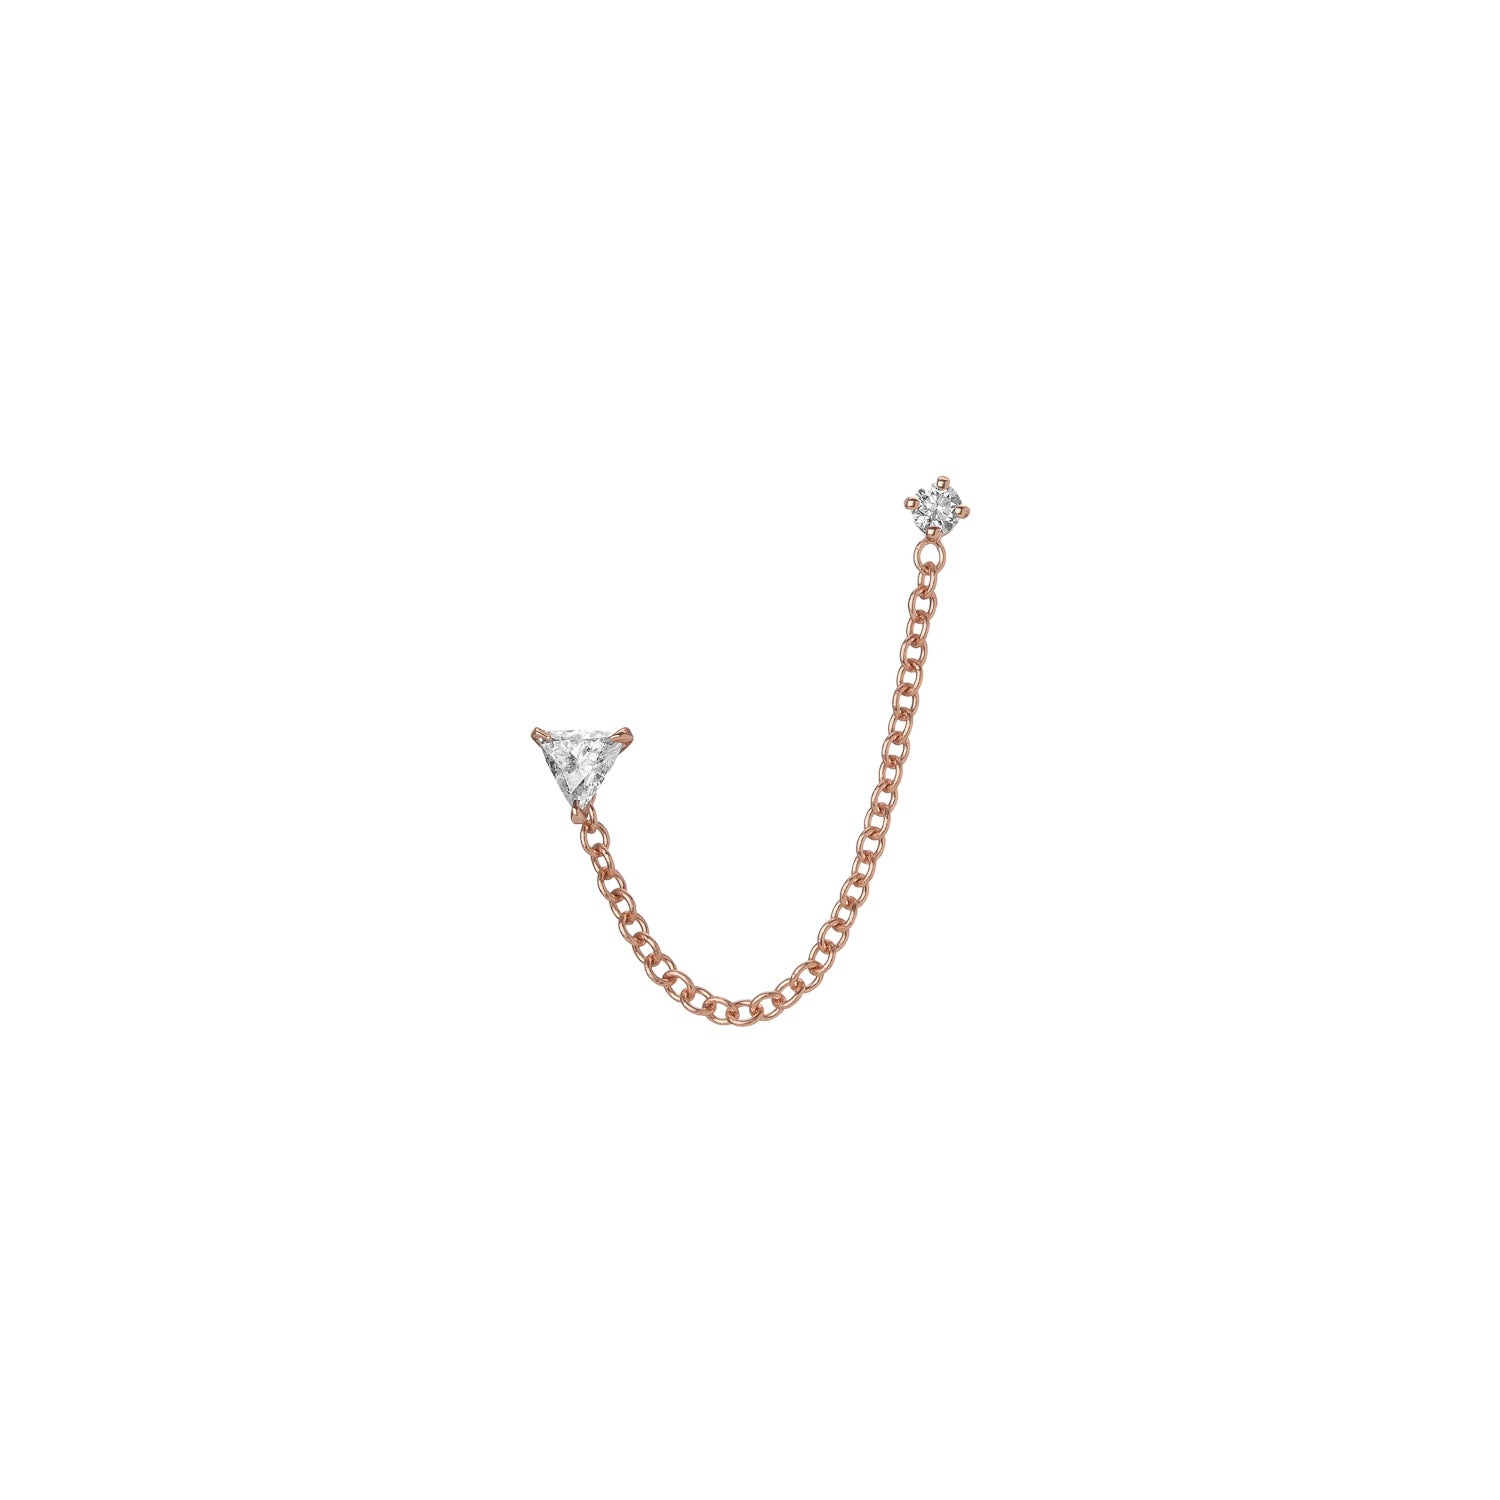 Shahla Karimi Mid-Century Wright Ear Chain in 14K Rose Gold w/ Brilliant and Triangle Studs